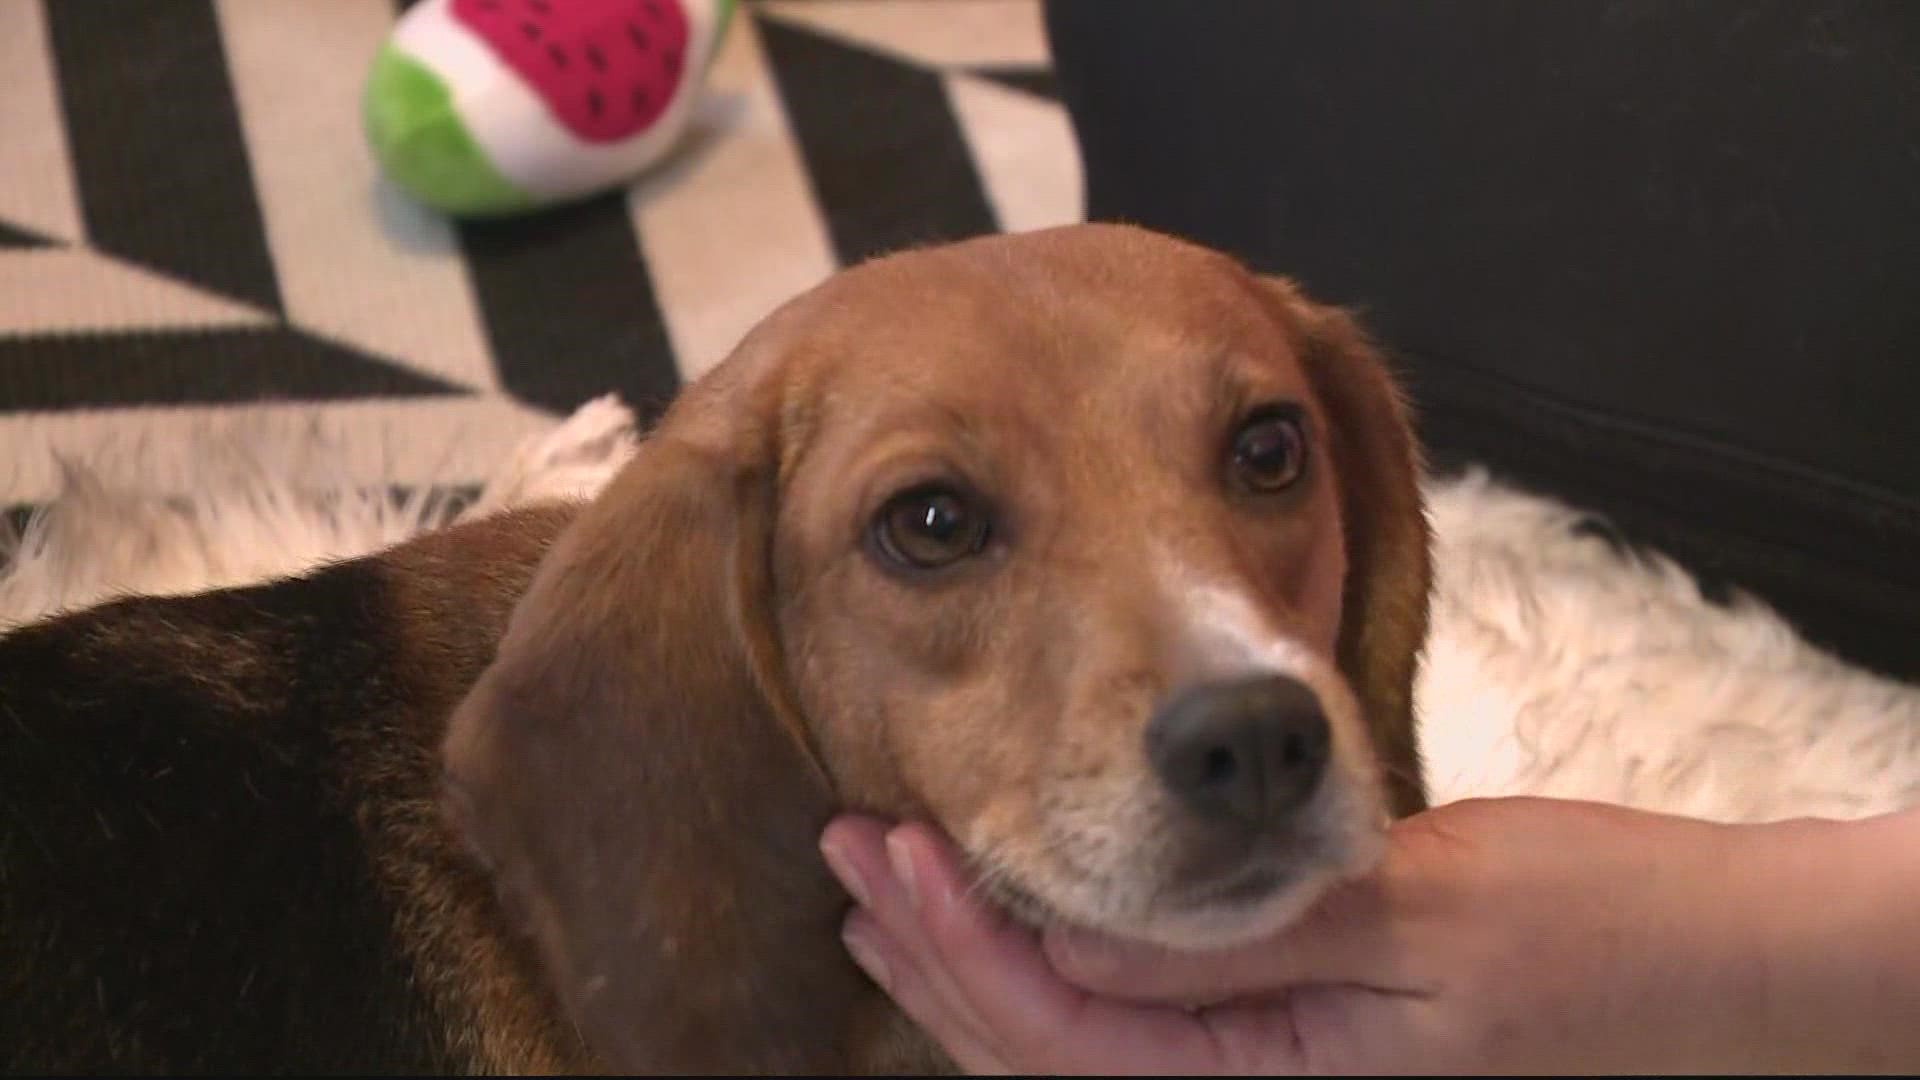 The beagles are experiencing many firsts after their rescue.